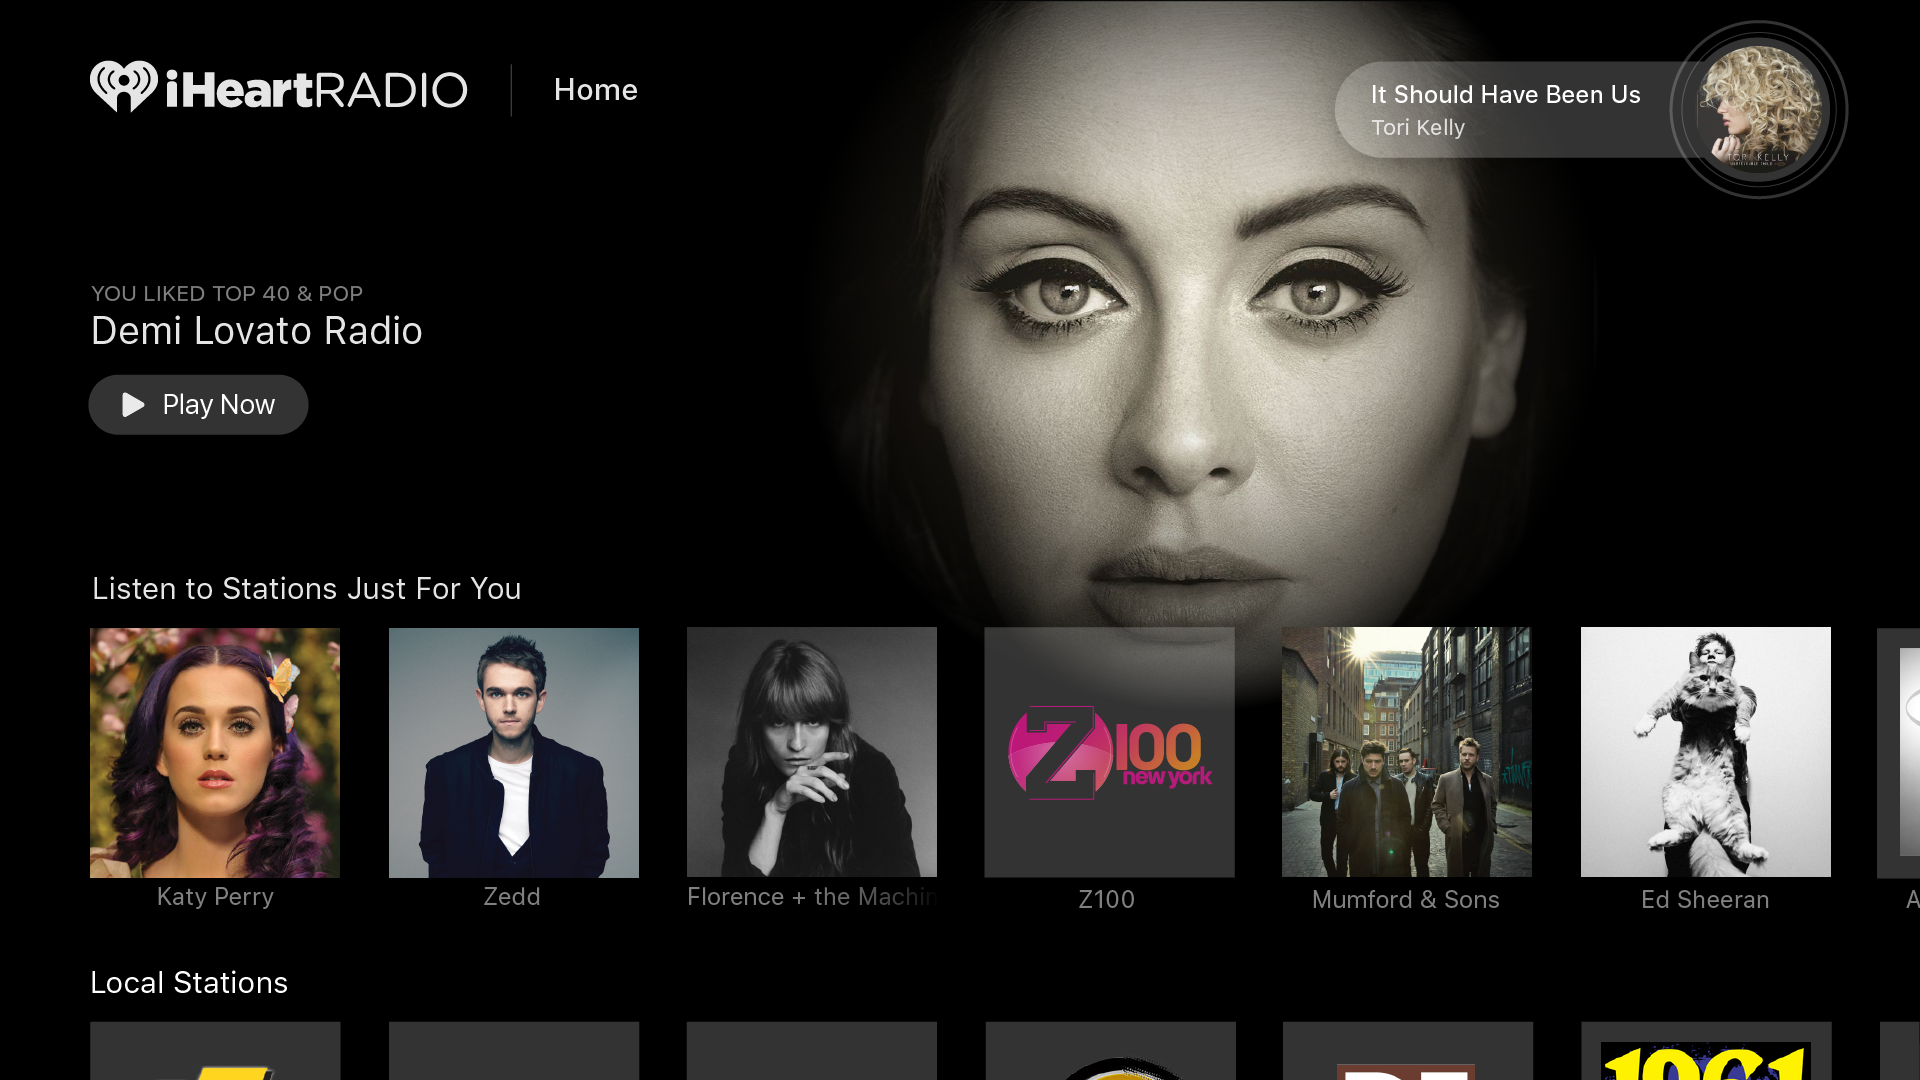 iHR_APPLETV_browse_v7_03a_BROWSE_FORYOU_play now-adele.png